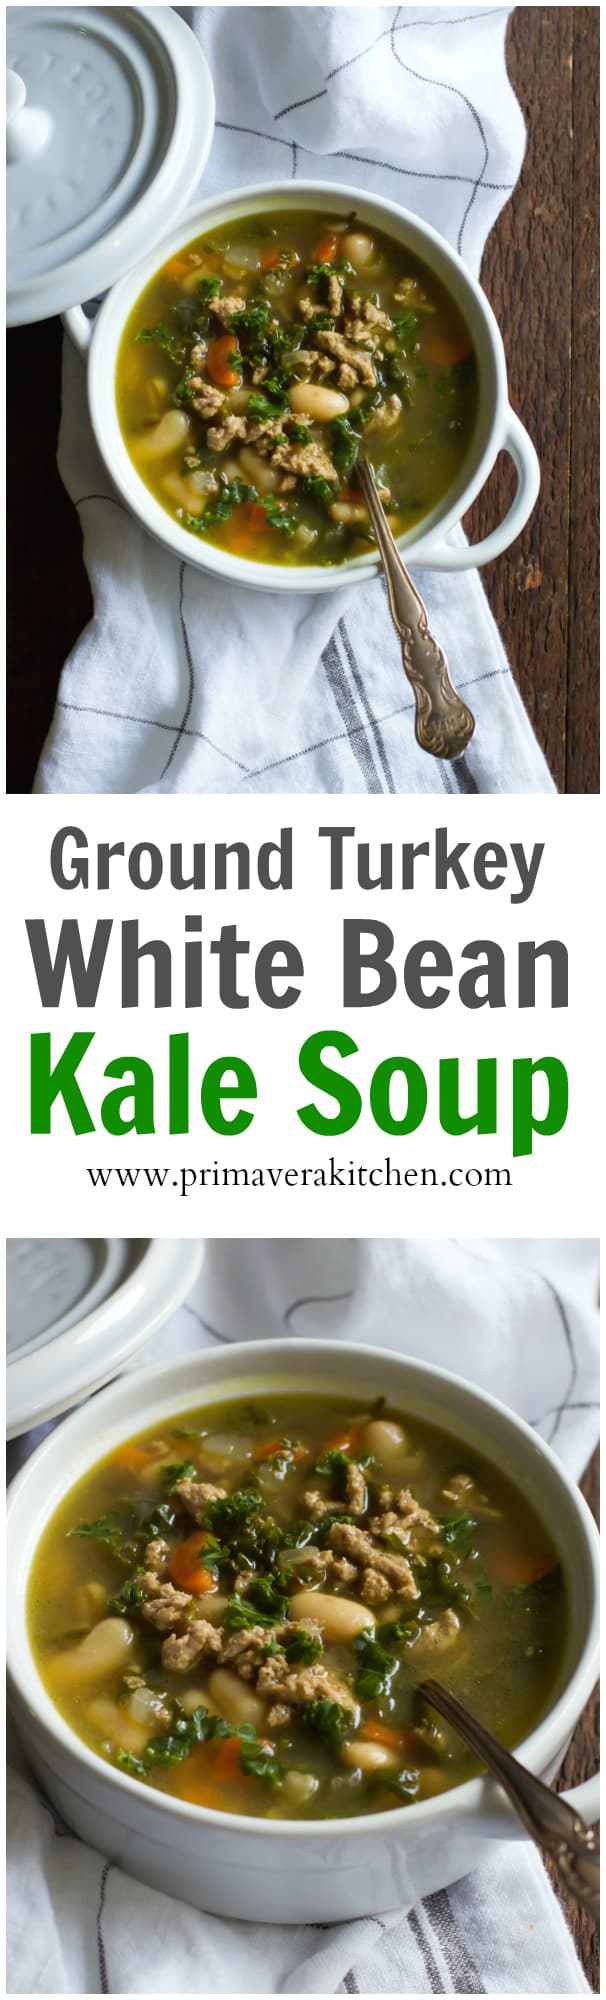 Ground Turkey White Bean Kale Soup - This Ground Turkey White Bean Kale Soup is incredibly delicious, comforting, filling and perfect for the busy weeknights because it’s ready in less than 30 minutes.